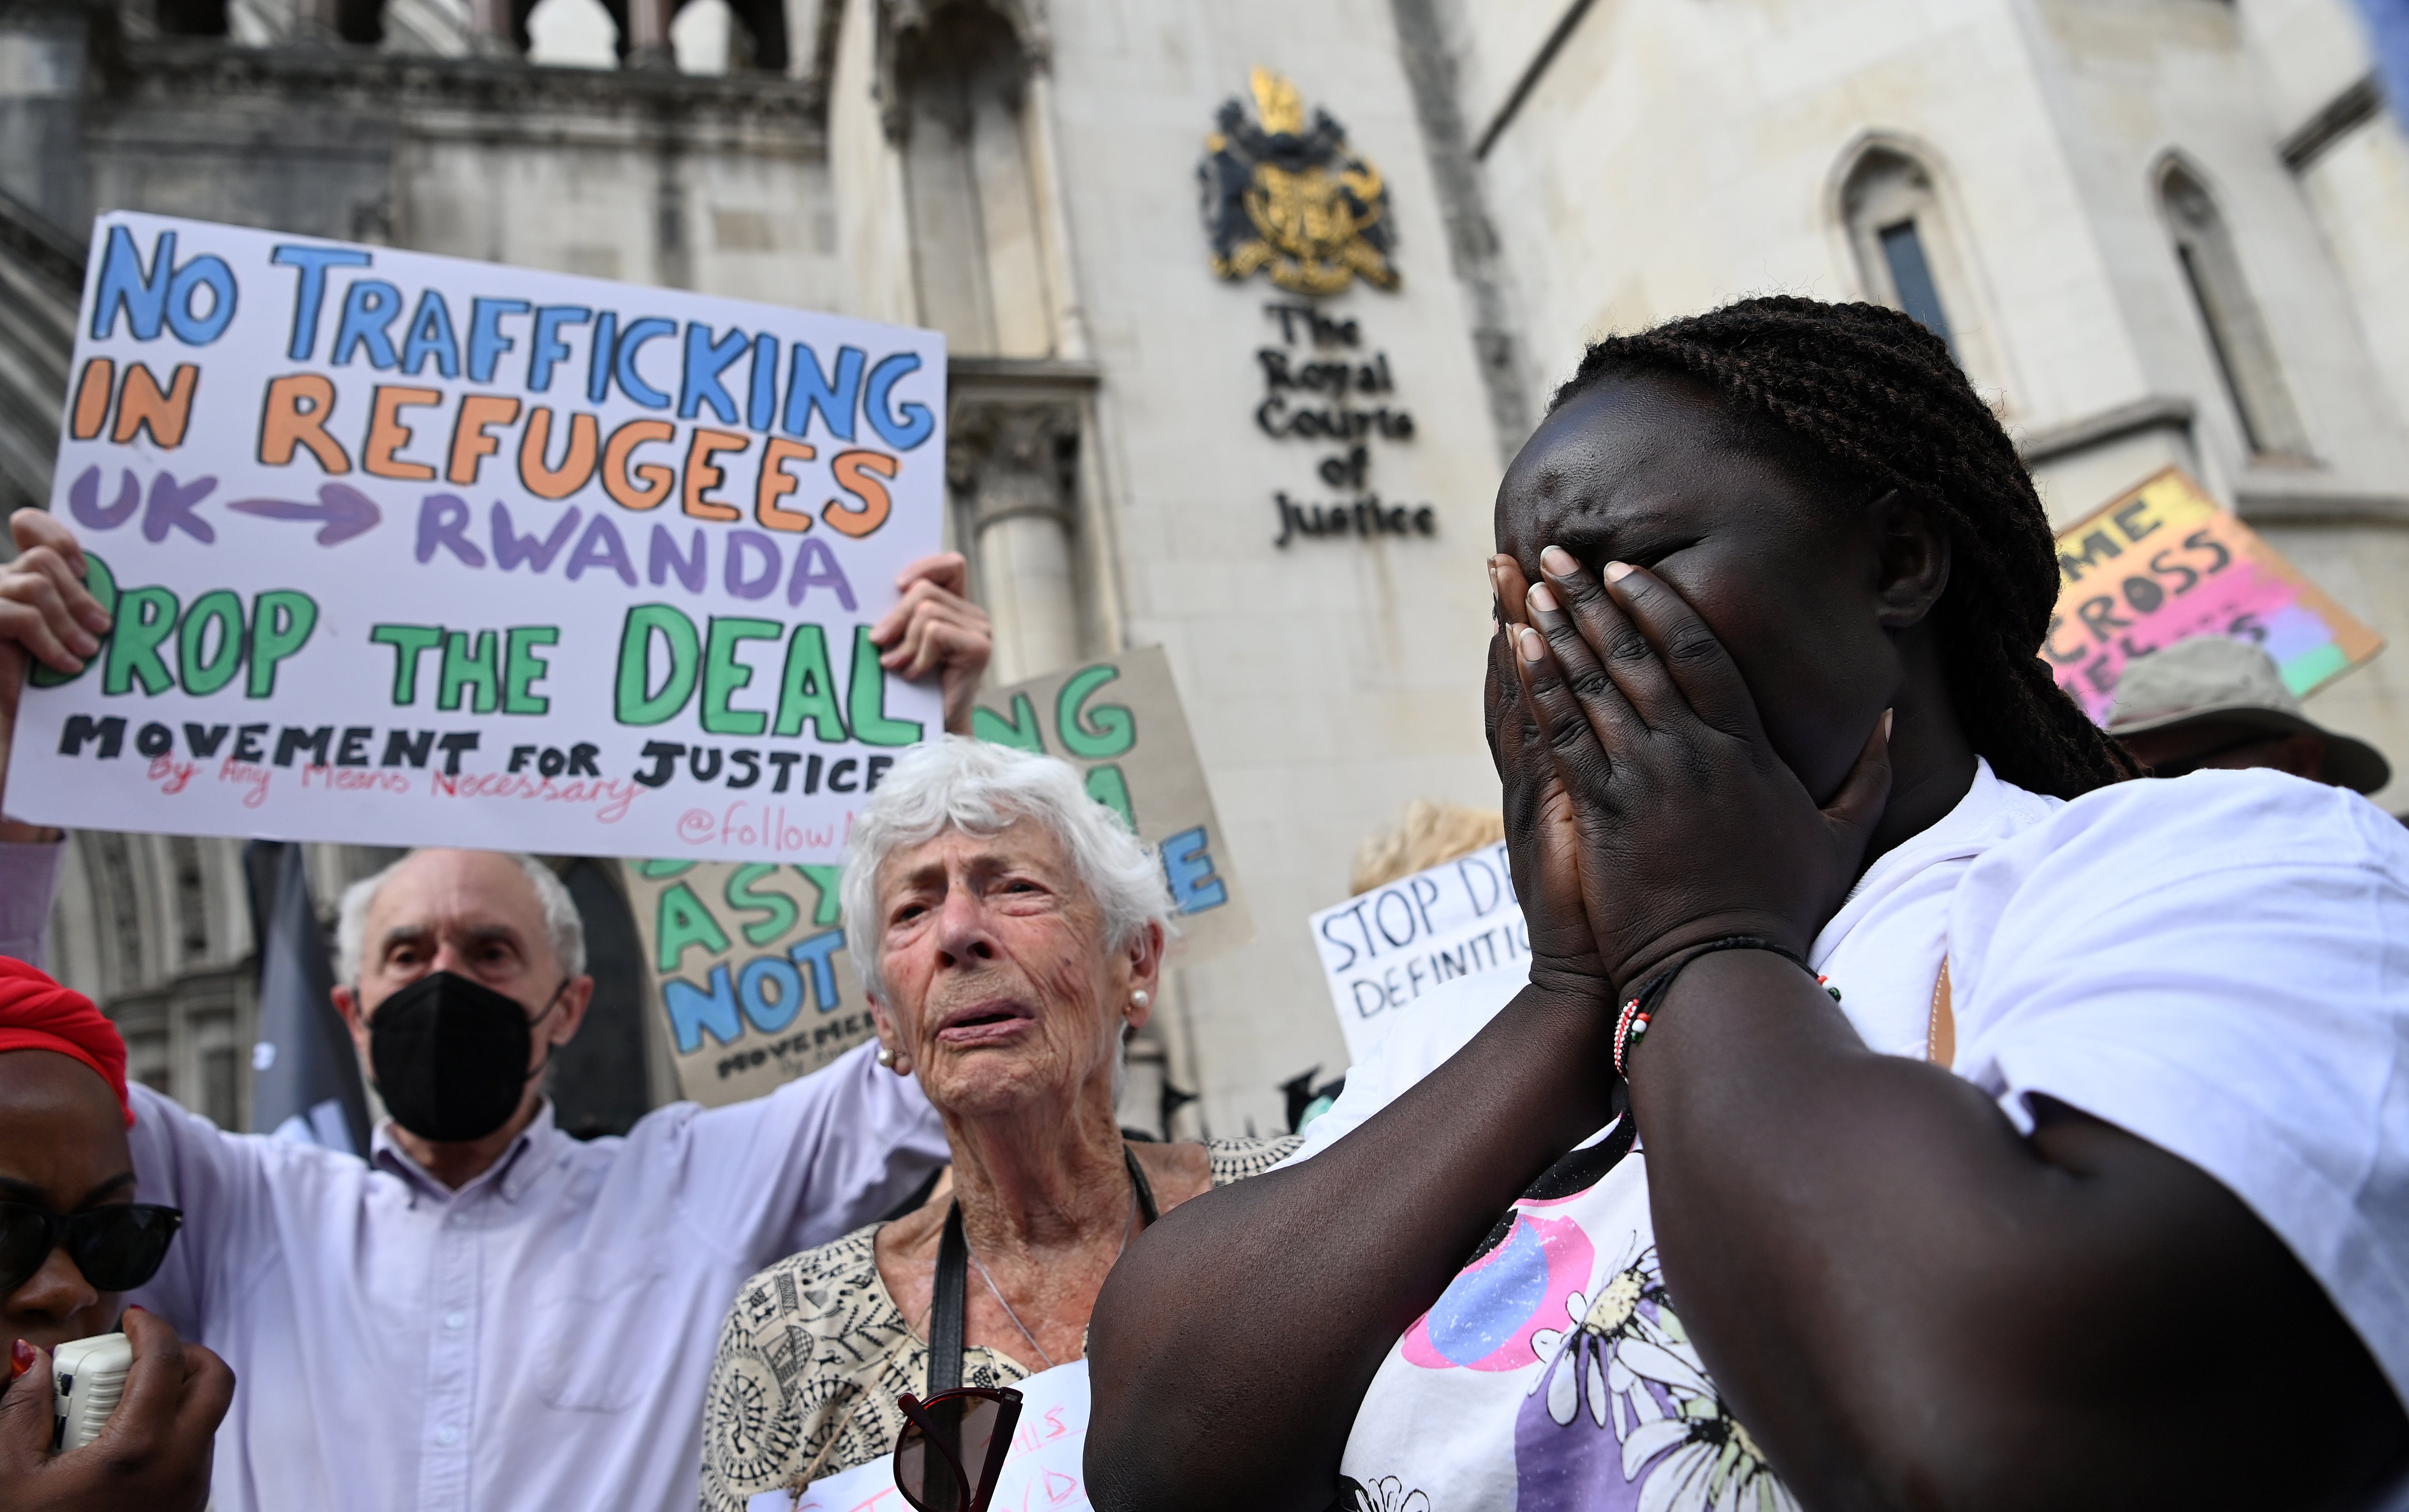 Human rights campaigners react after losing the appeal outside the High Court in London on Monday